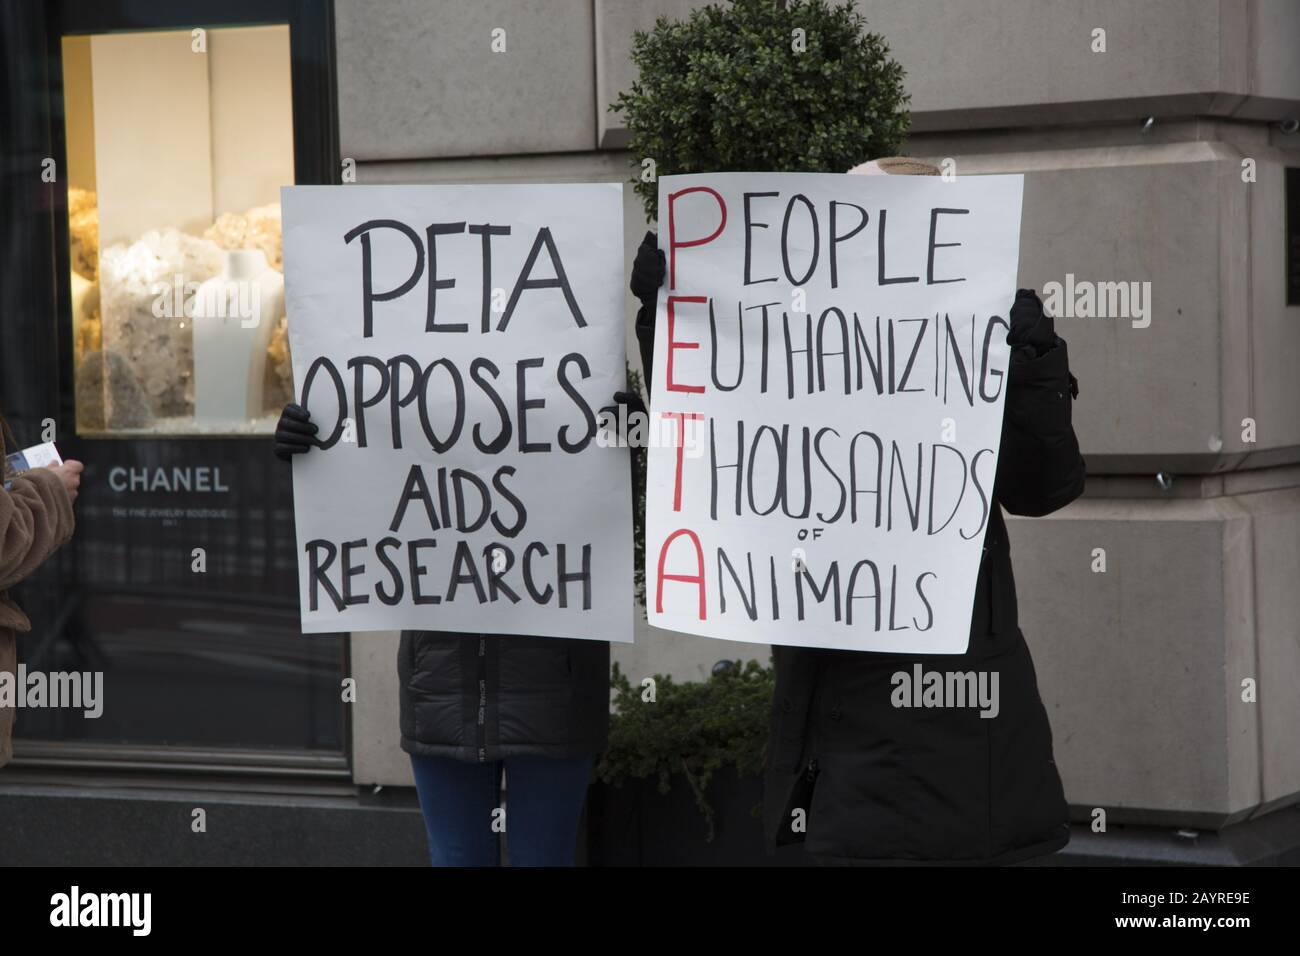 Animal Rights activists out in force in front of Bergdorf Goodman's on 5th Avenue during Fashion Week in Manhattan, New York City. Stock Photo